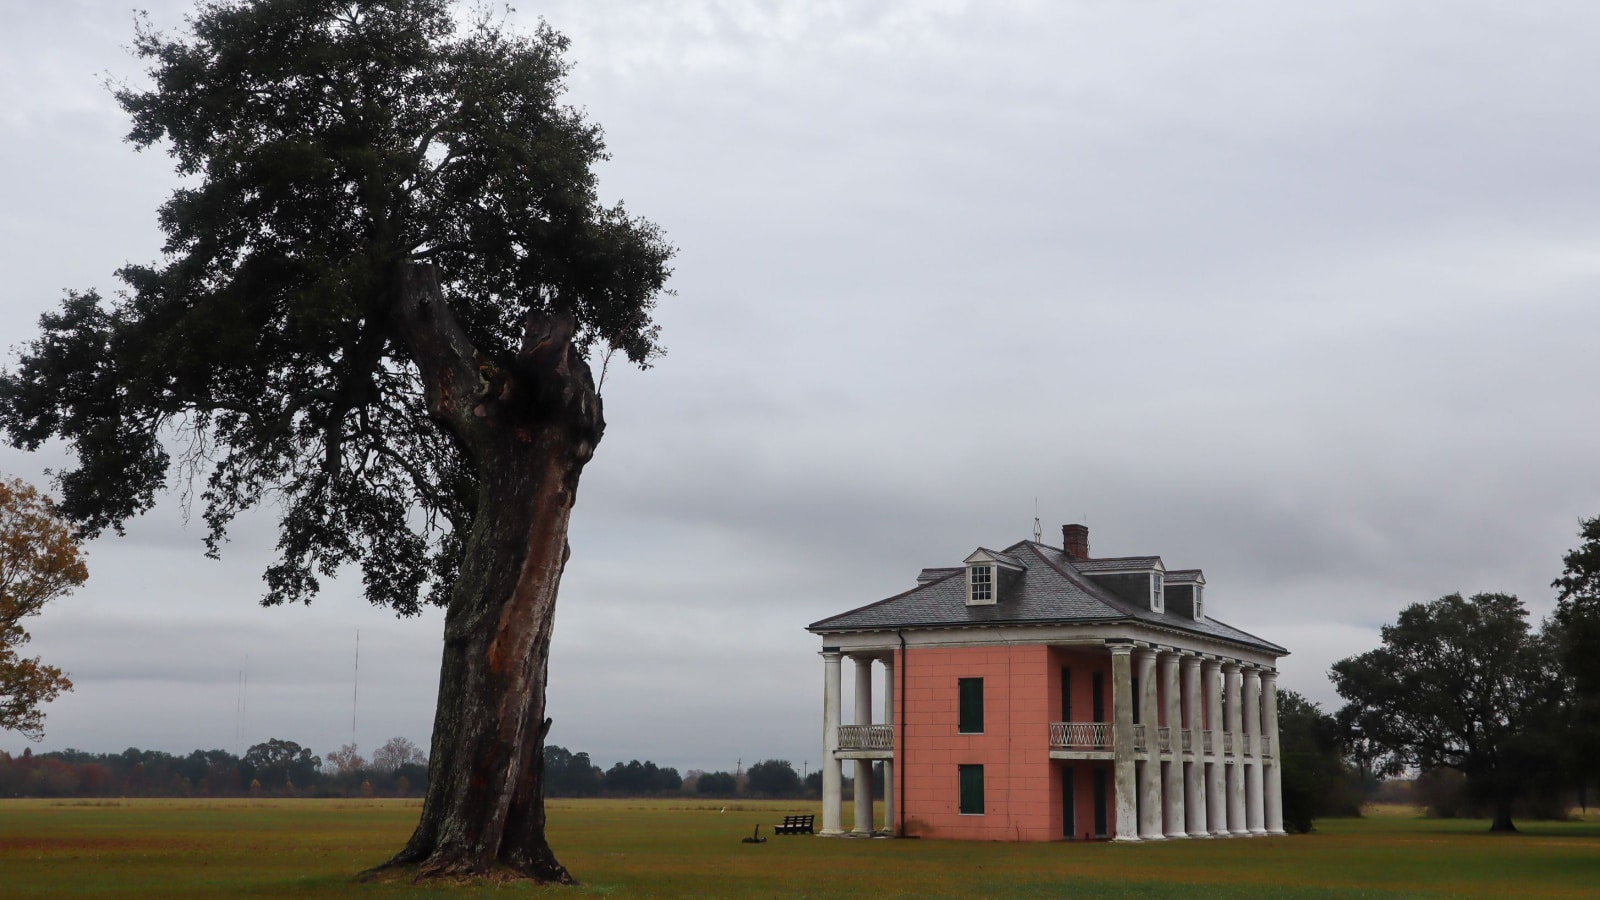 Chalmette Battlefield, Louisiana, United States of America - December 19th 2018: House at Jean Lafitte National Historical Park and Preserve in Chalmette, Louisiana, USA.